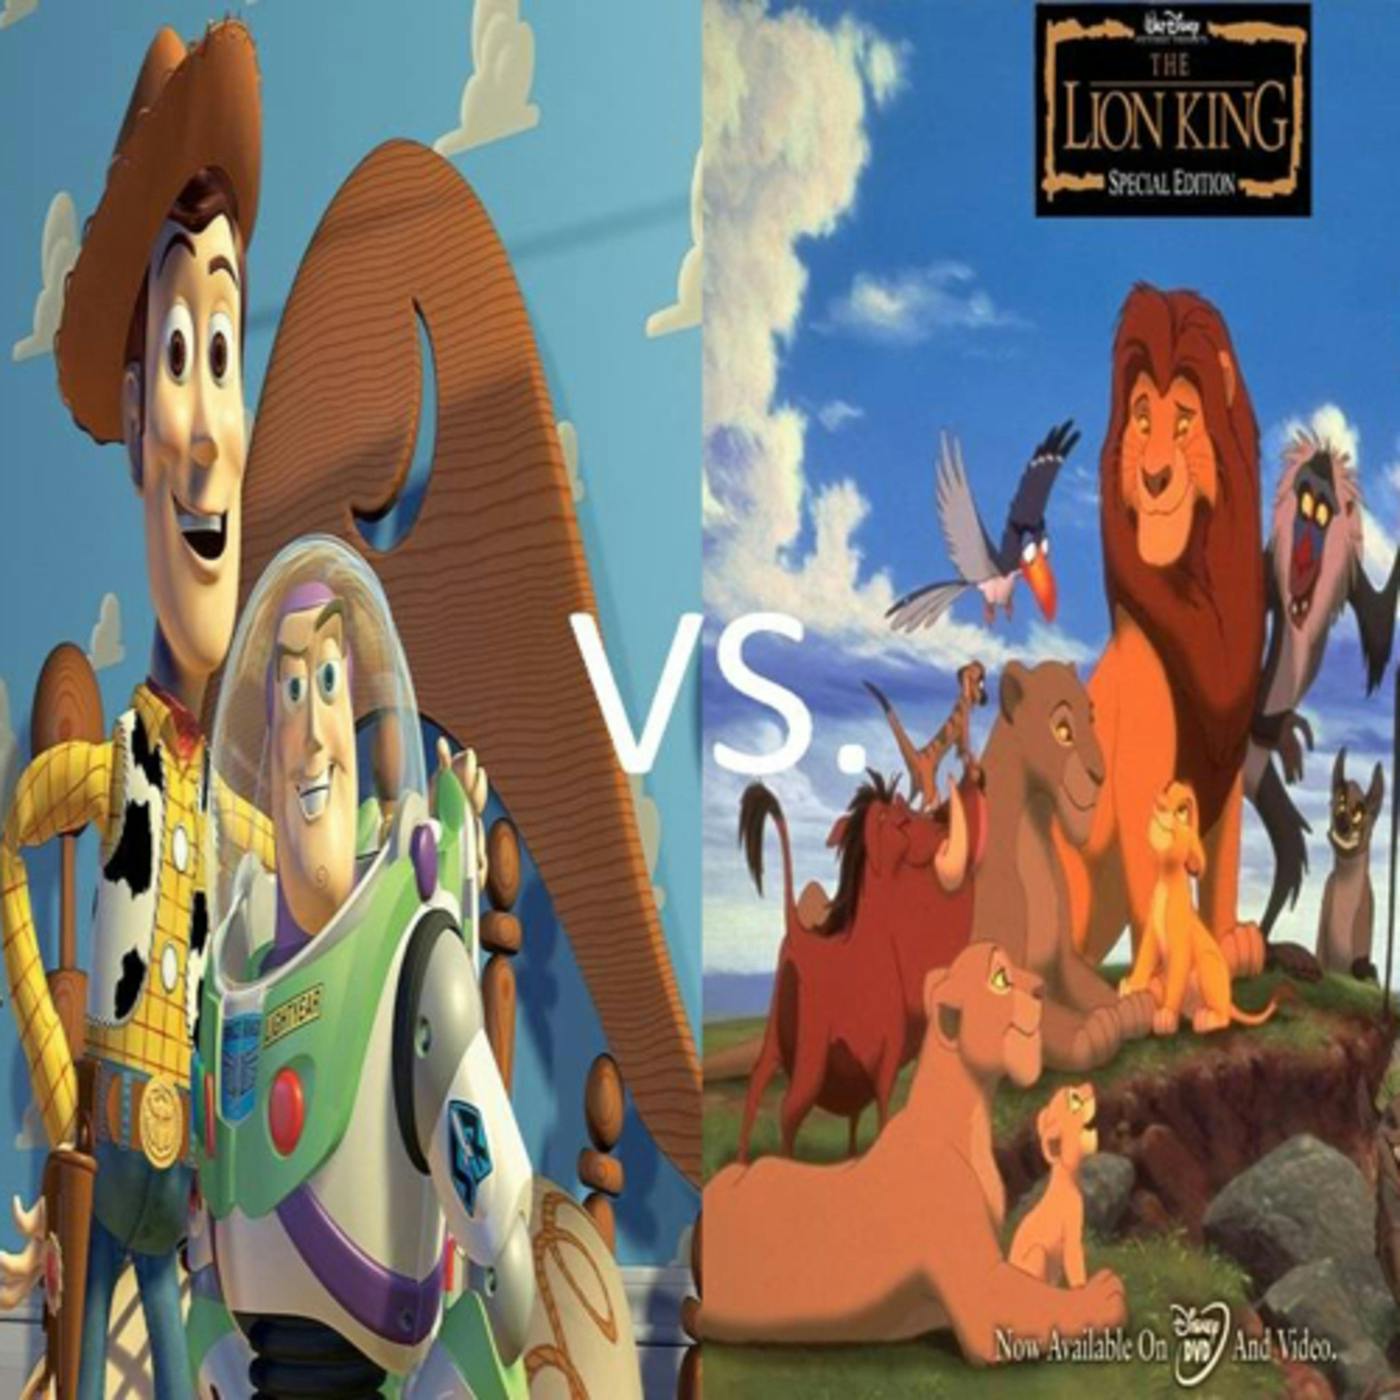 Ep. 167 - RVK TBT - Lion King v. Toy Story, Uniforms & Retired Numbers